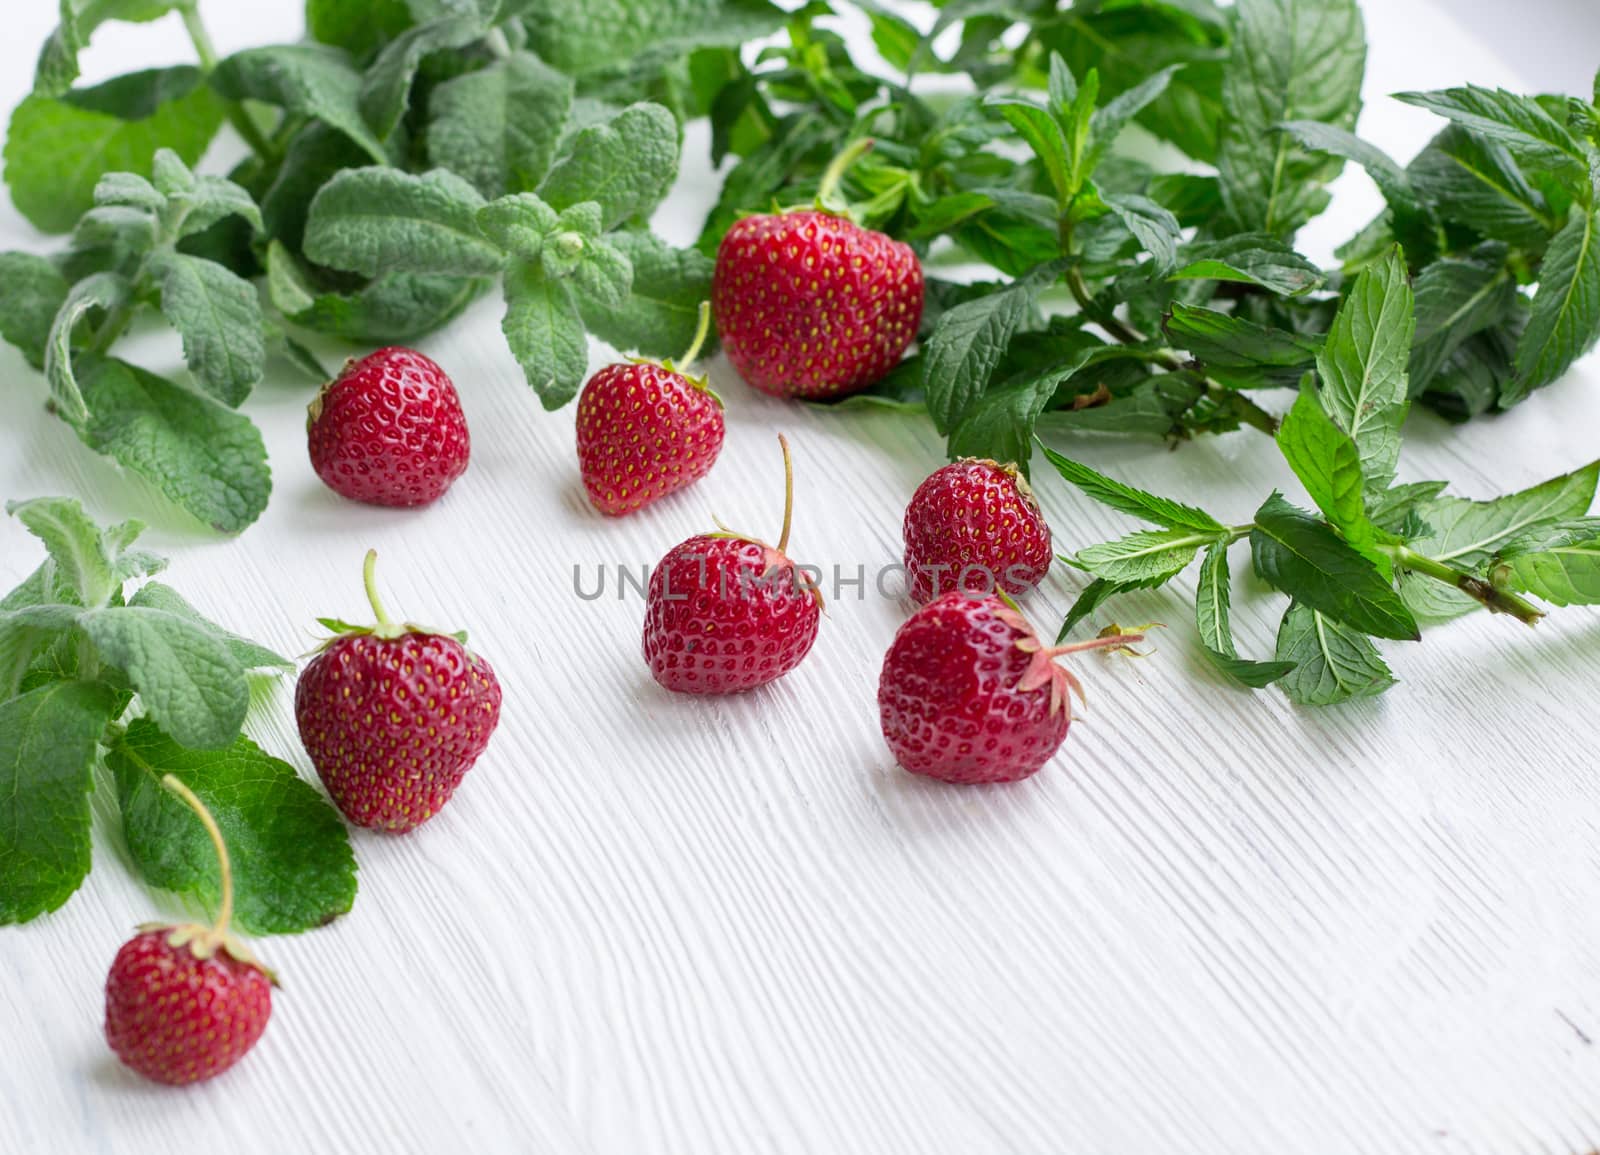 Red strawberries with green herbal mix of fresh mint and melissa herbs on white wooden background